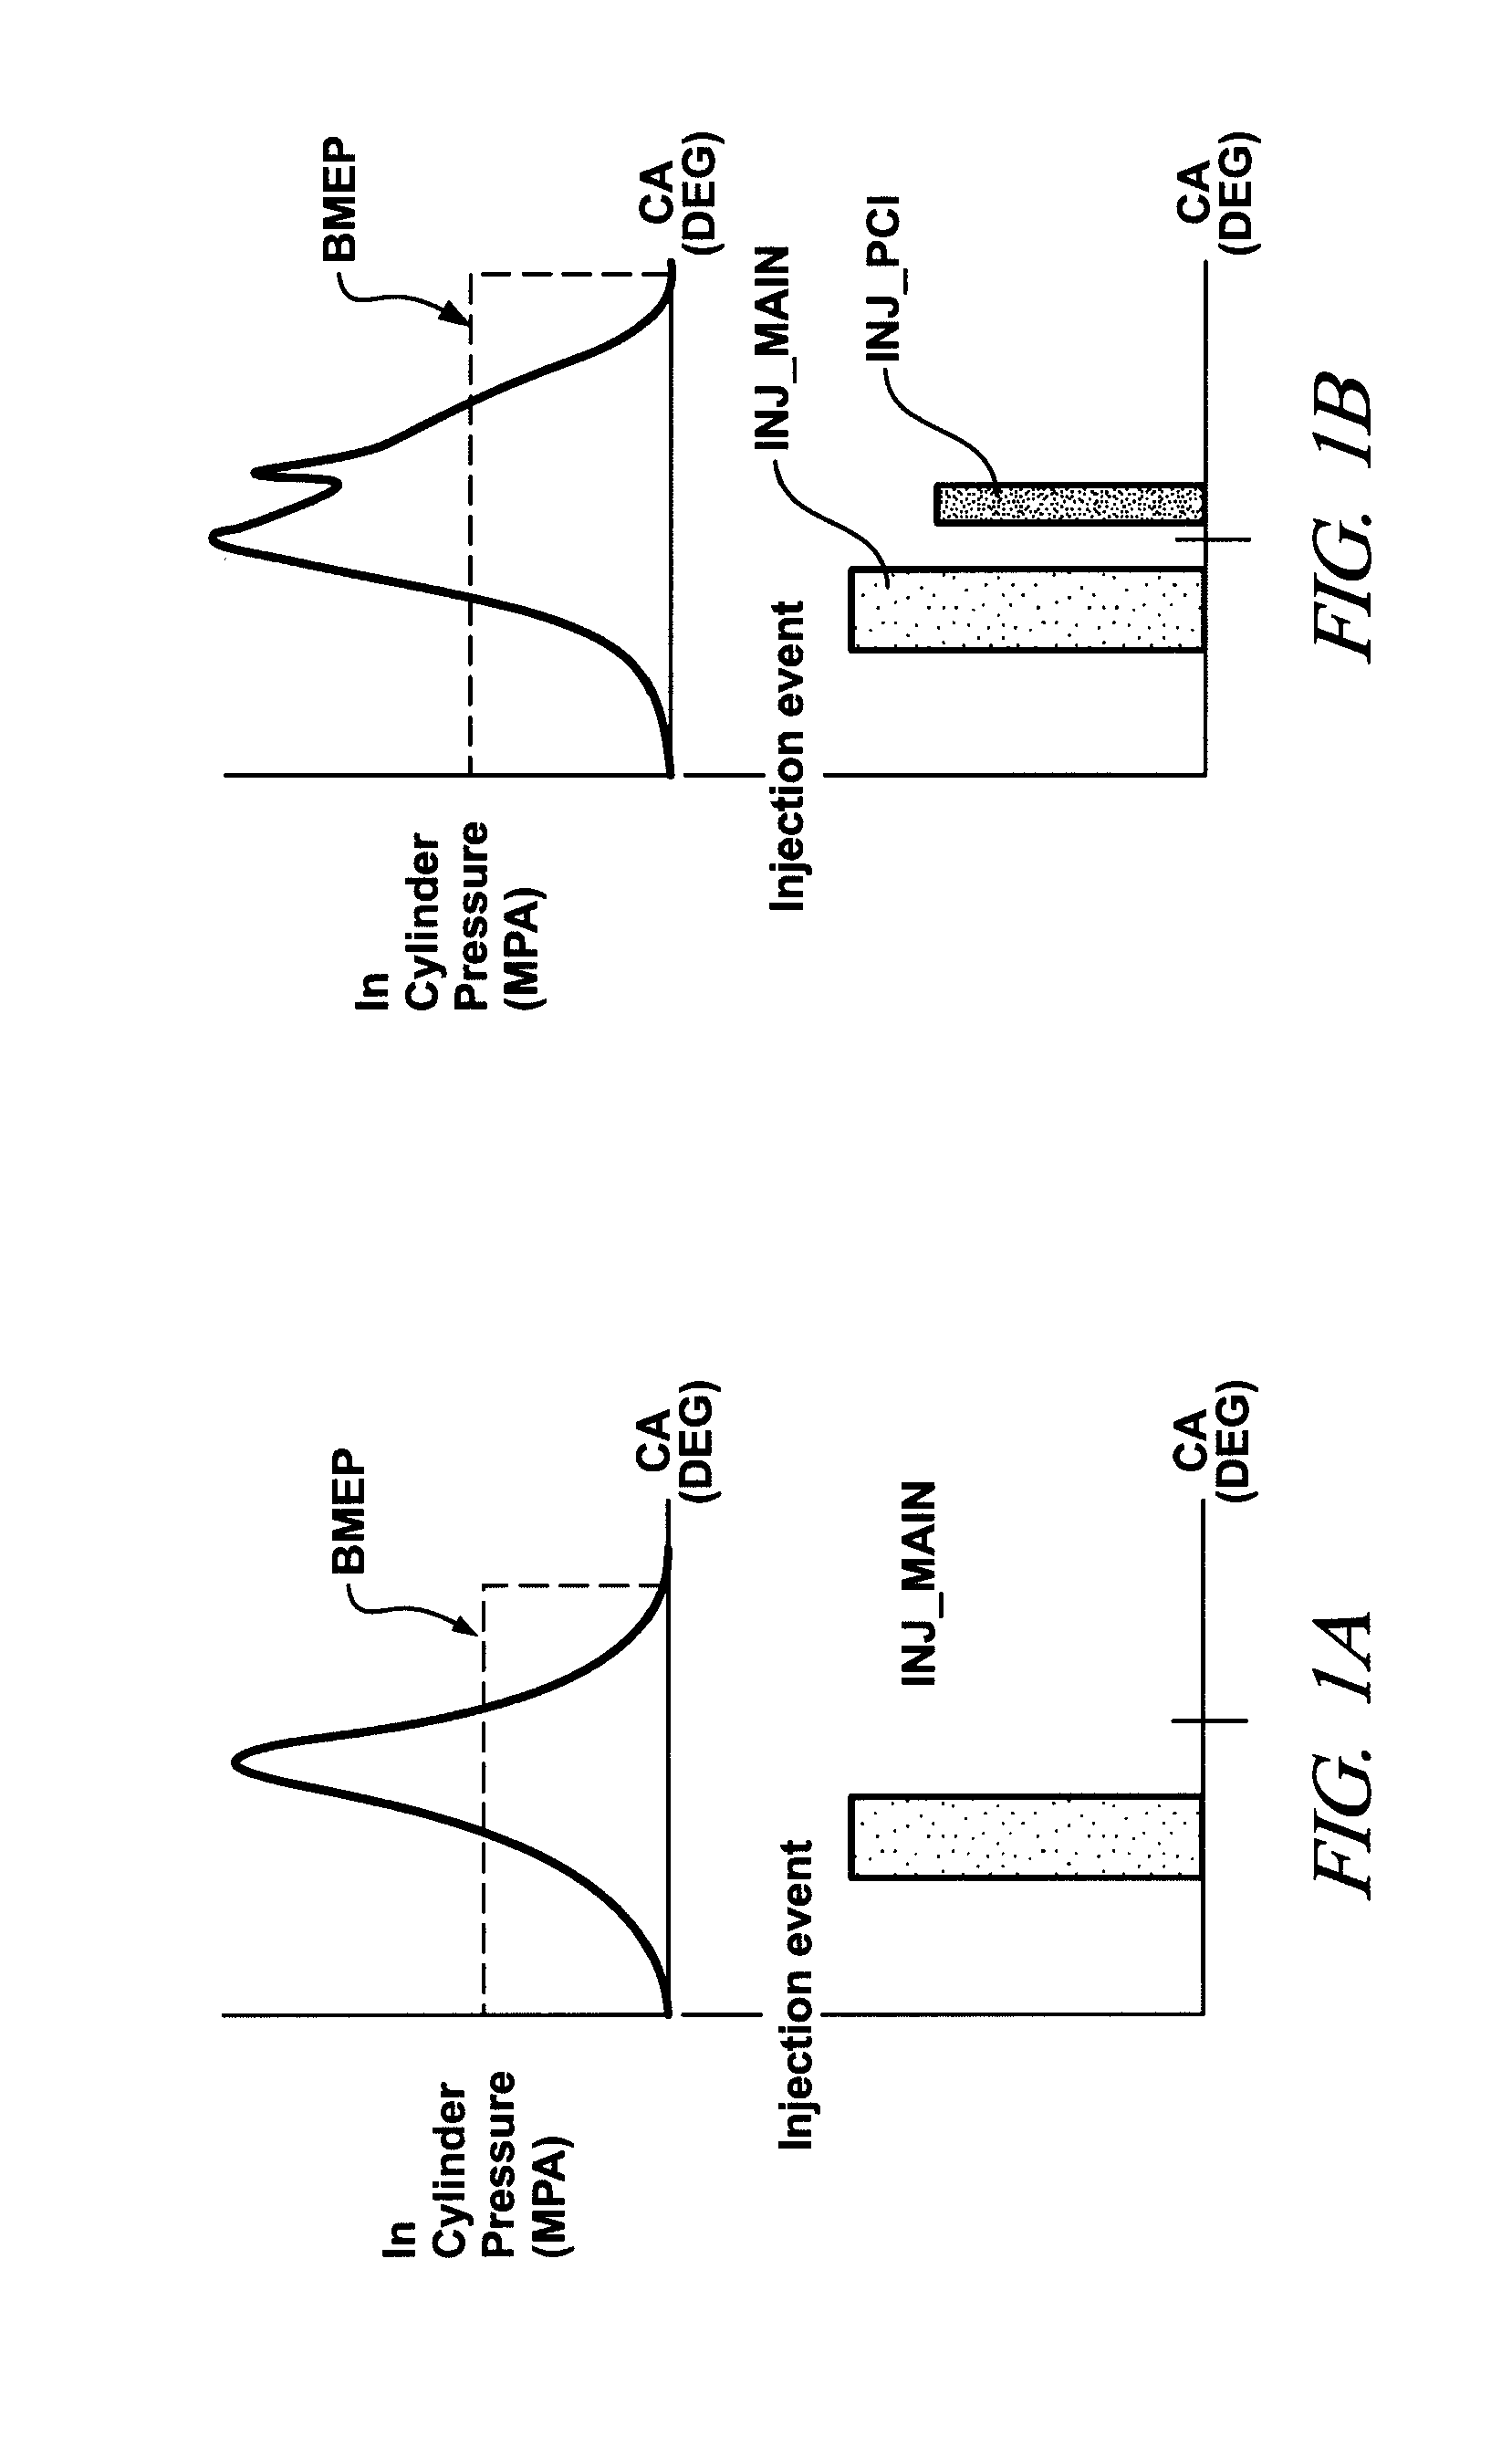 Method and apparatus for controlling engine operation during regeneration of an exhaust aftertreatment system